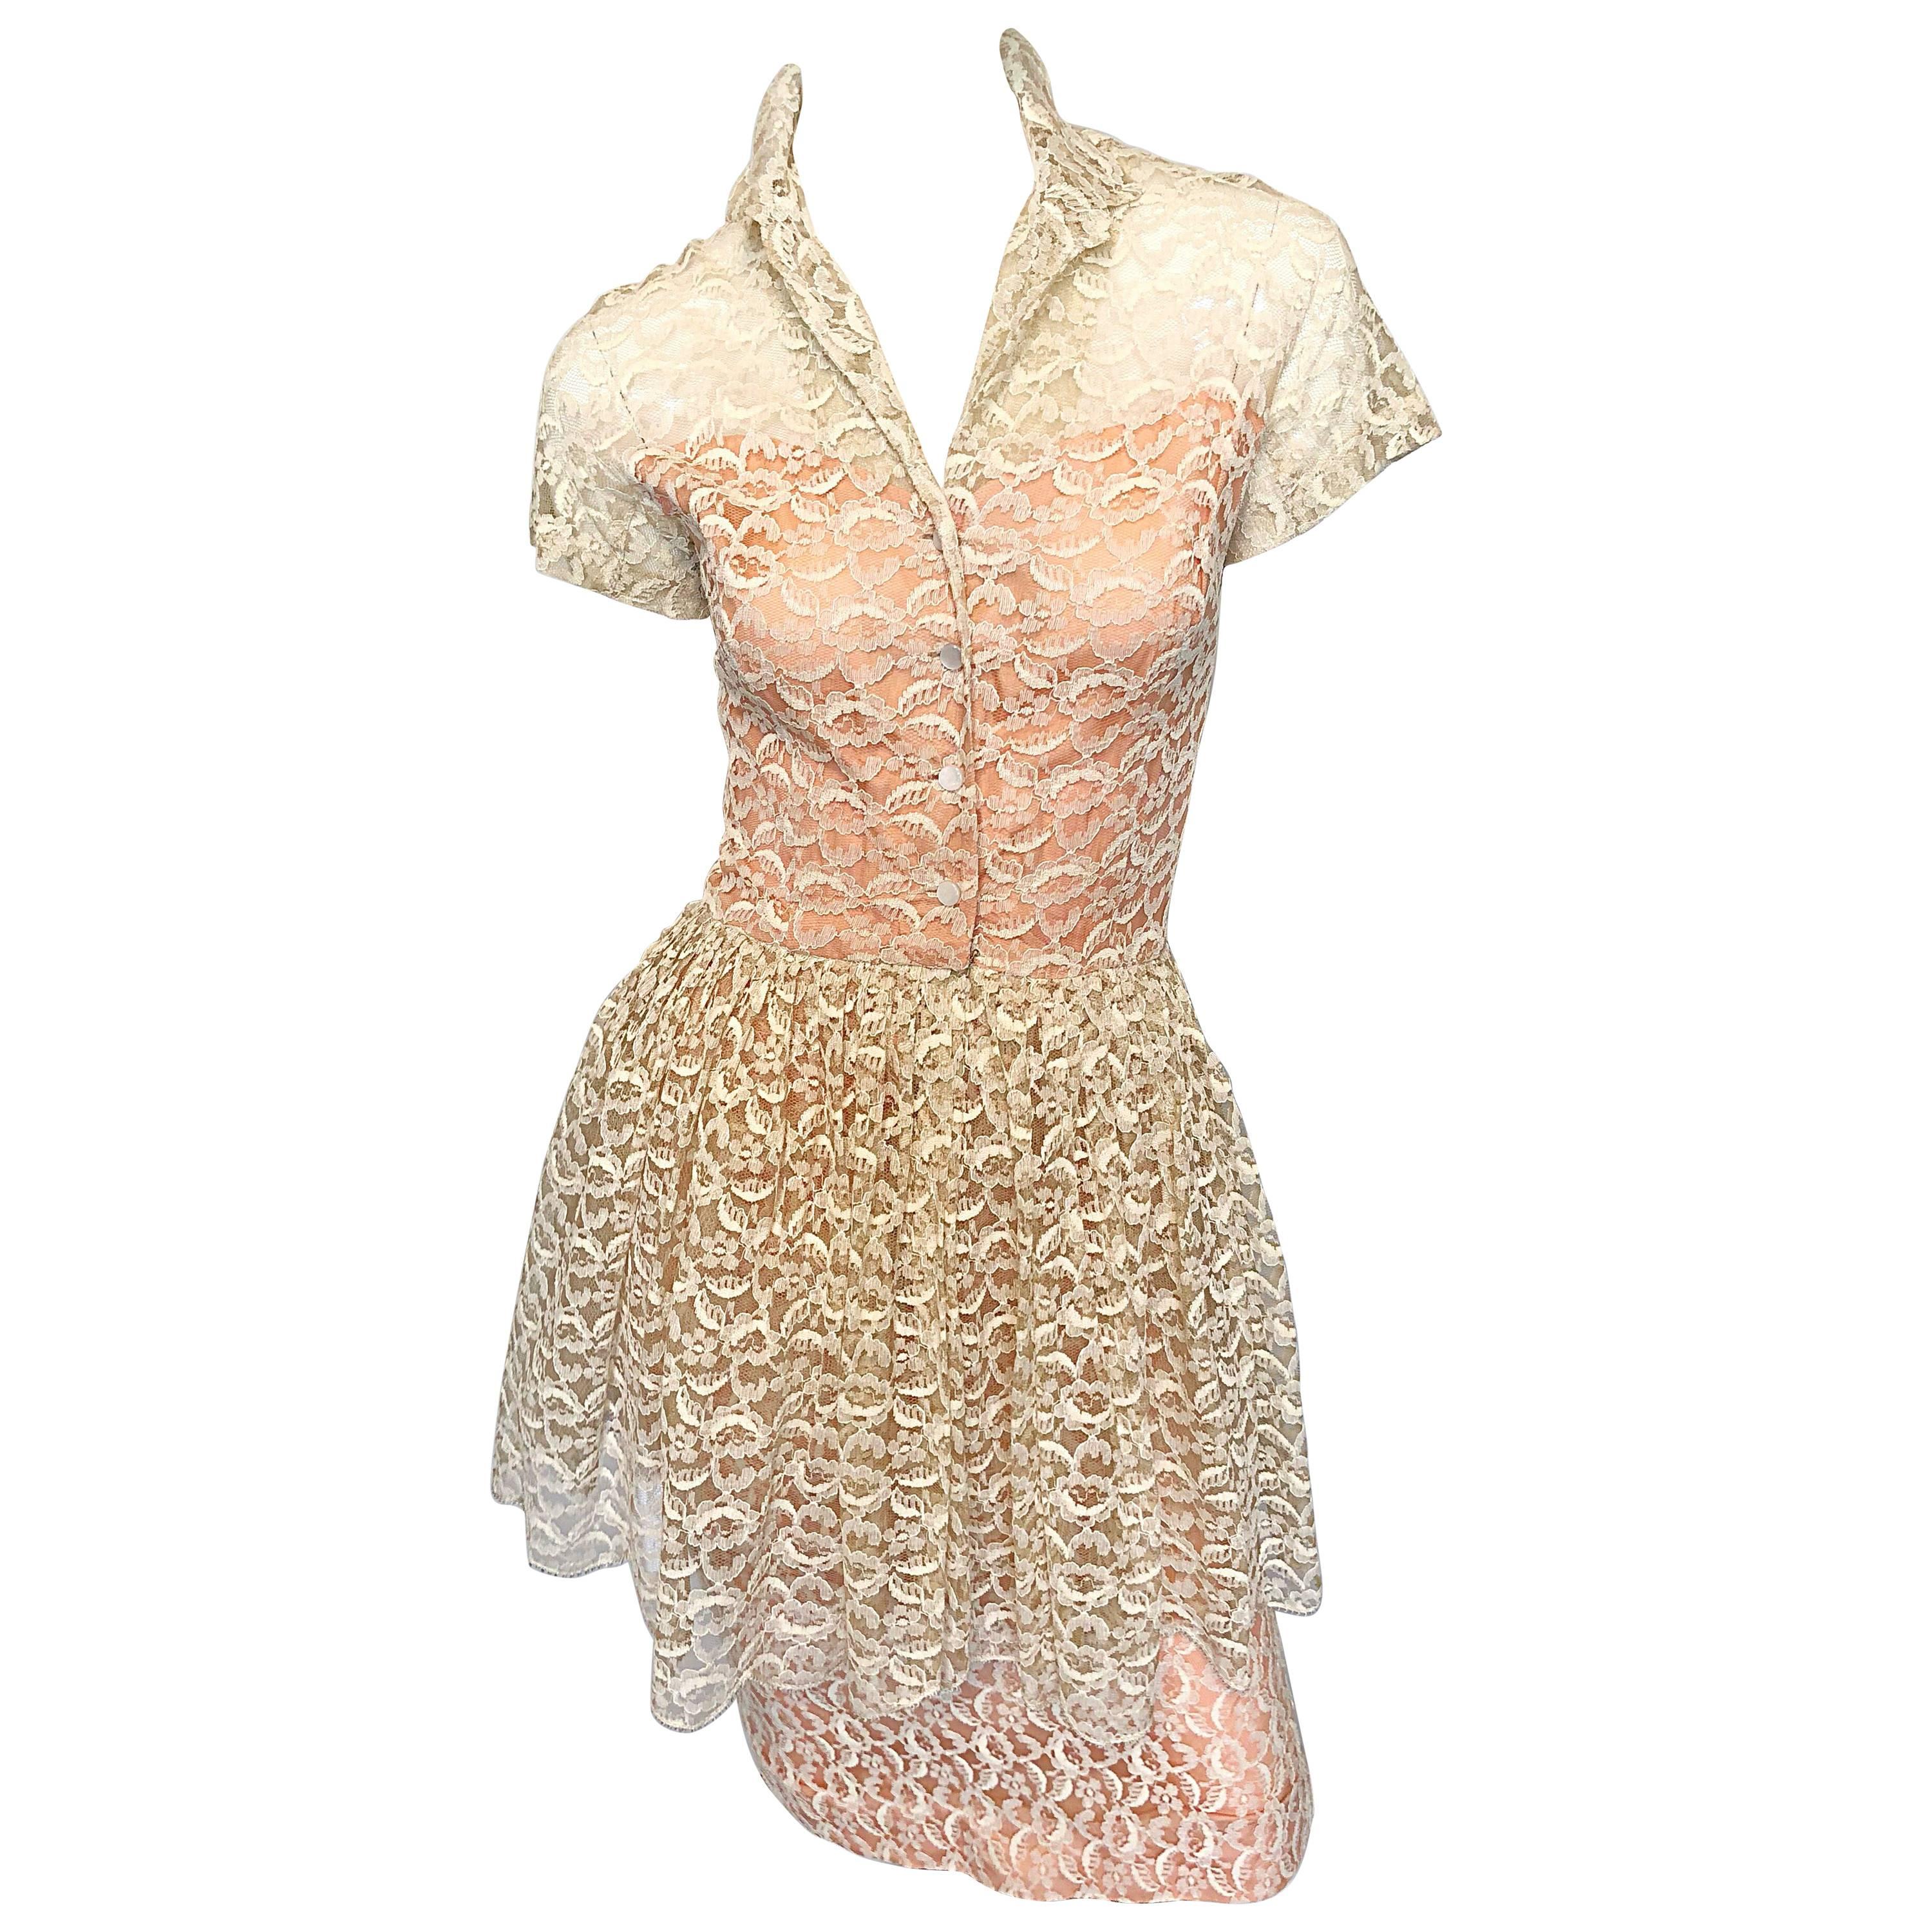 Demi Couture 1950s Neusteters Ivory + Pink Silk French Lace Vintage Peplum Dress For Sale